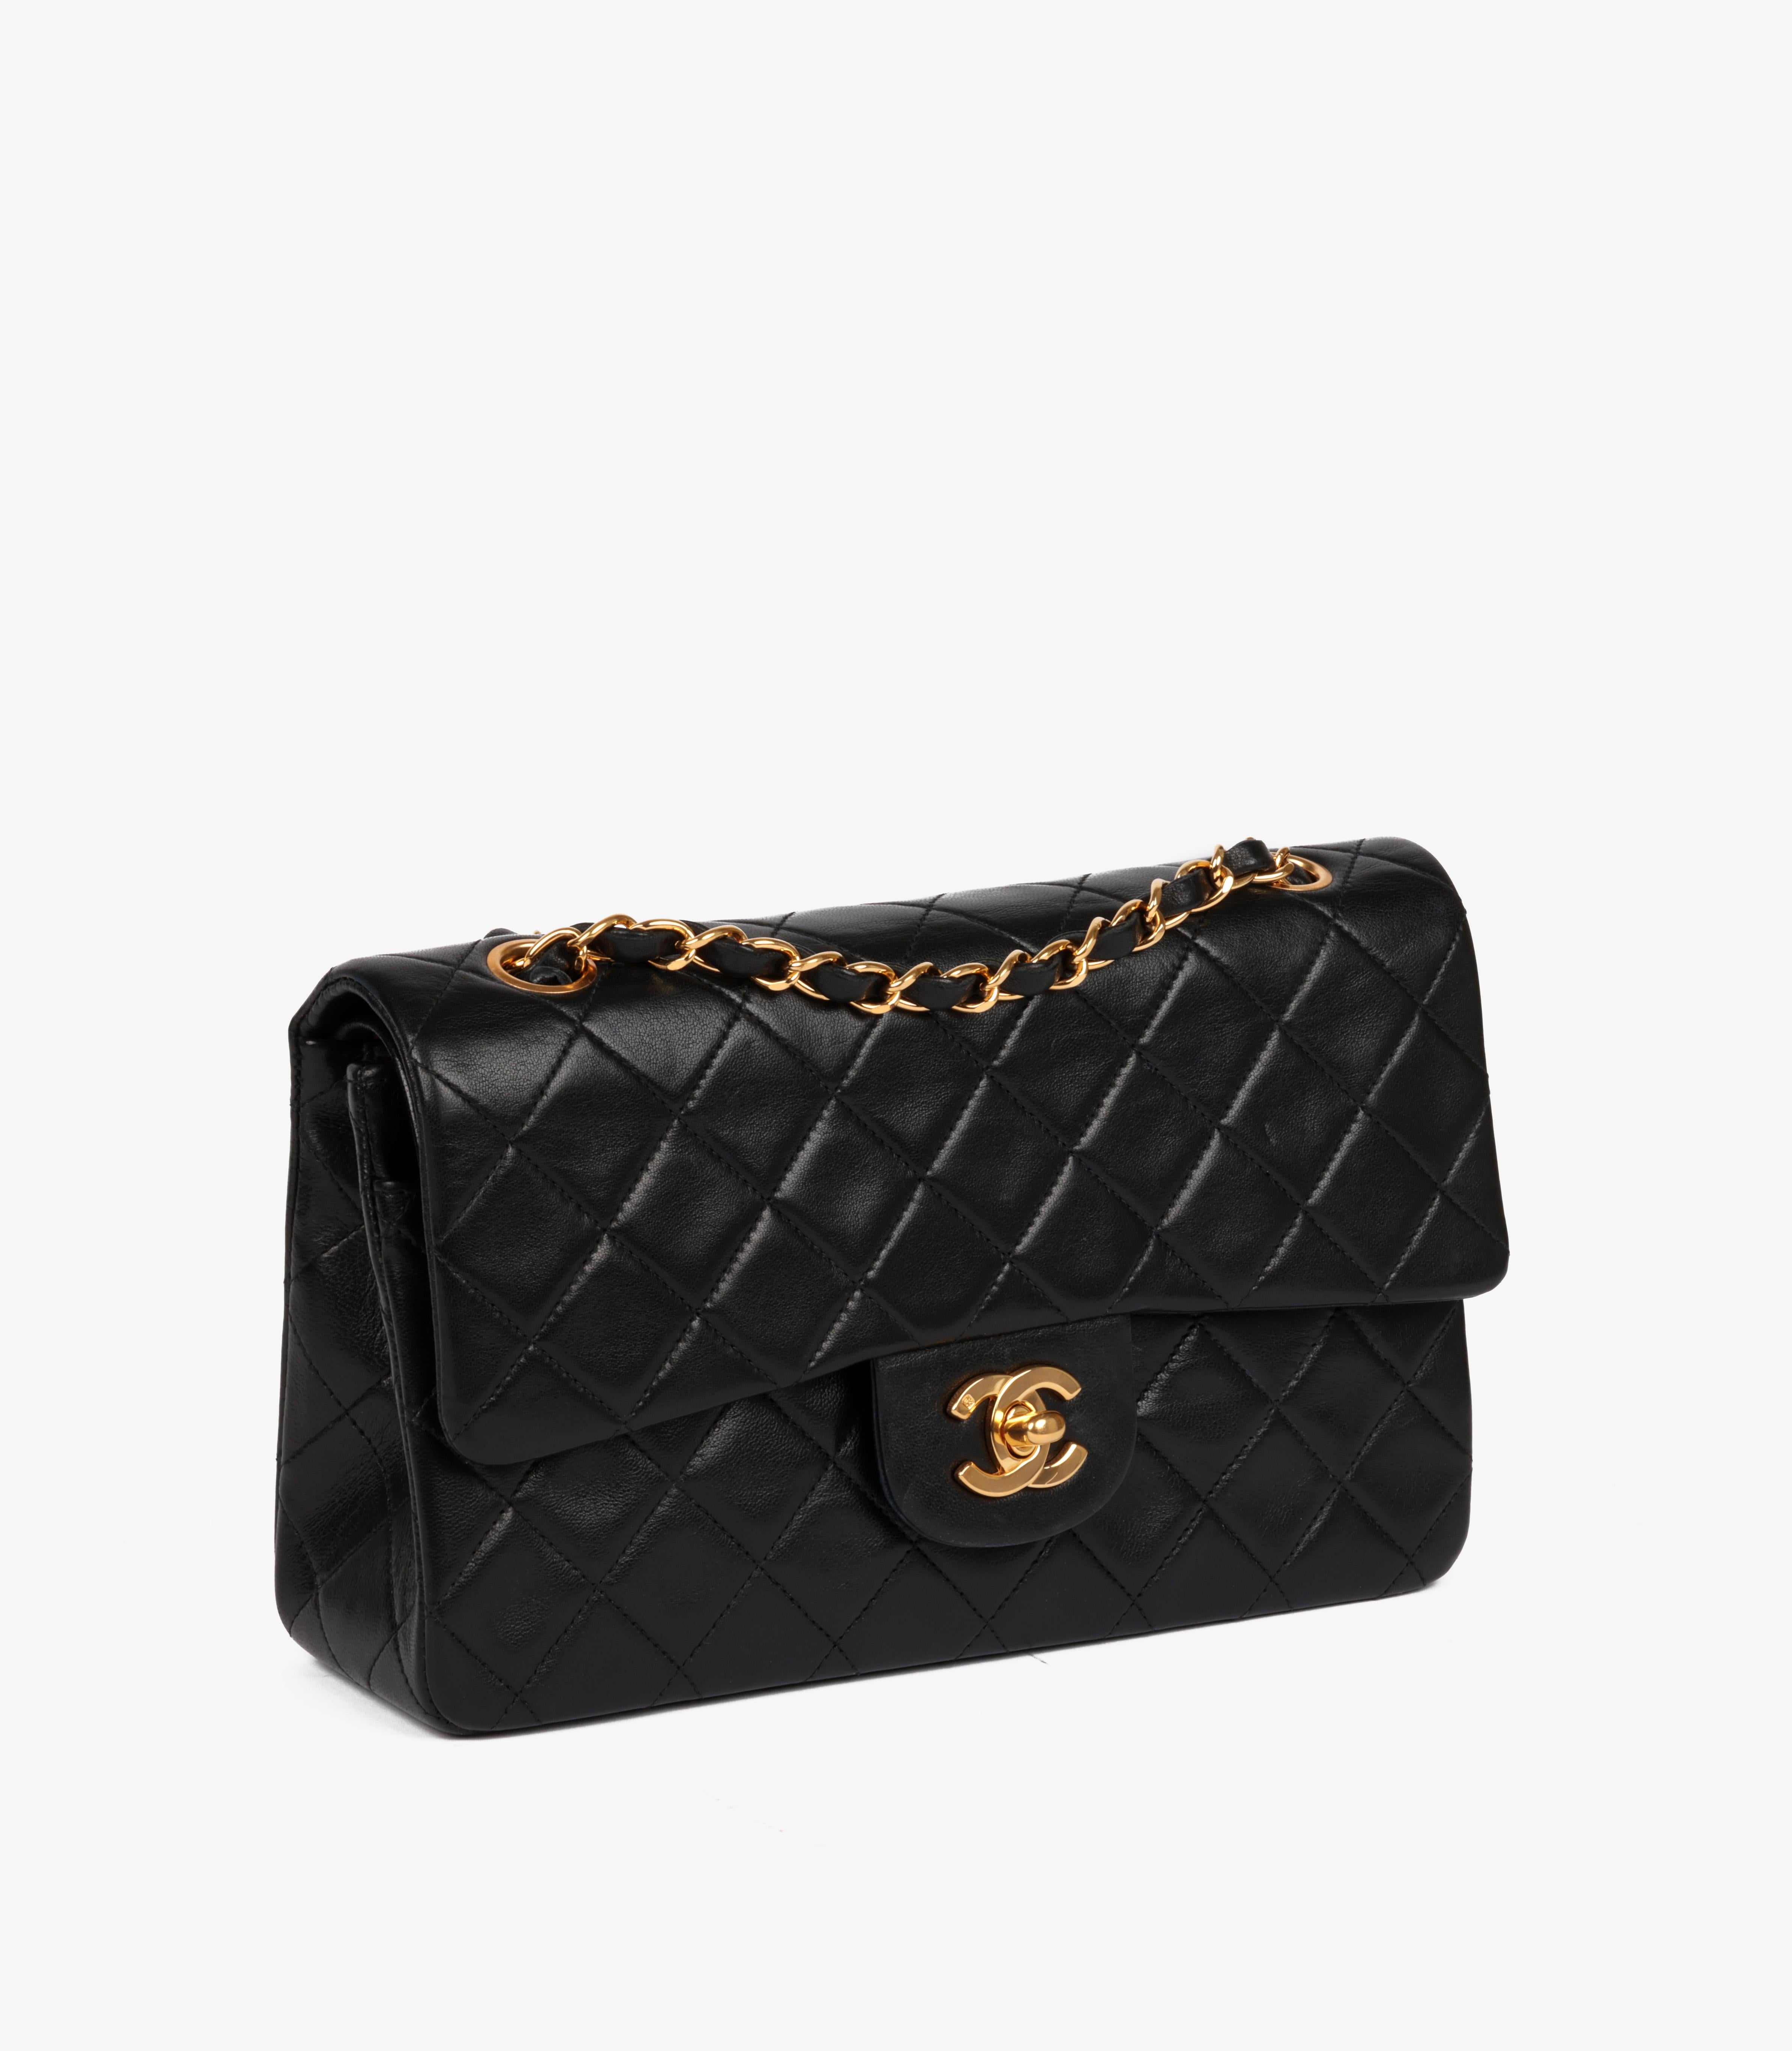 Chanel Black Quilted Lambskin Vintage Small Classic Double Flap Bag In Excellent Condition For Sale In Bishop's Stortford, Hertfordshire